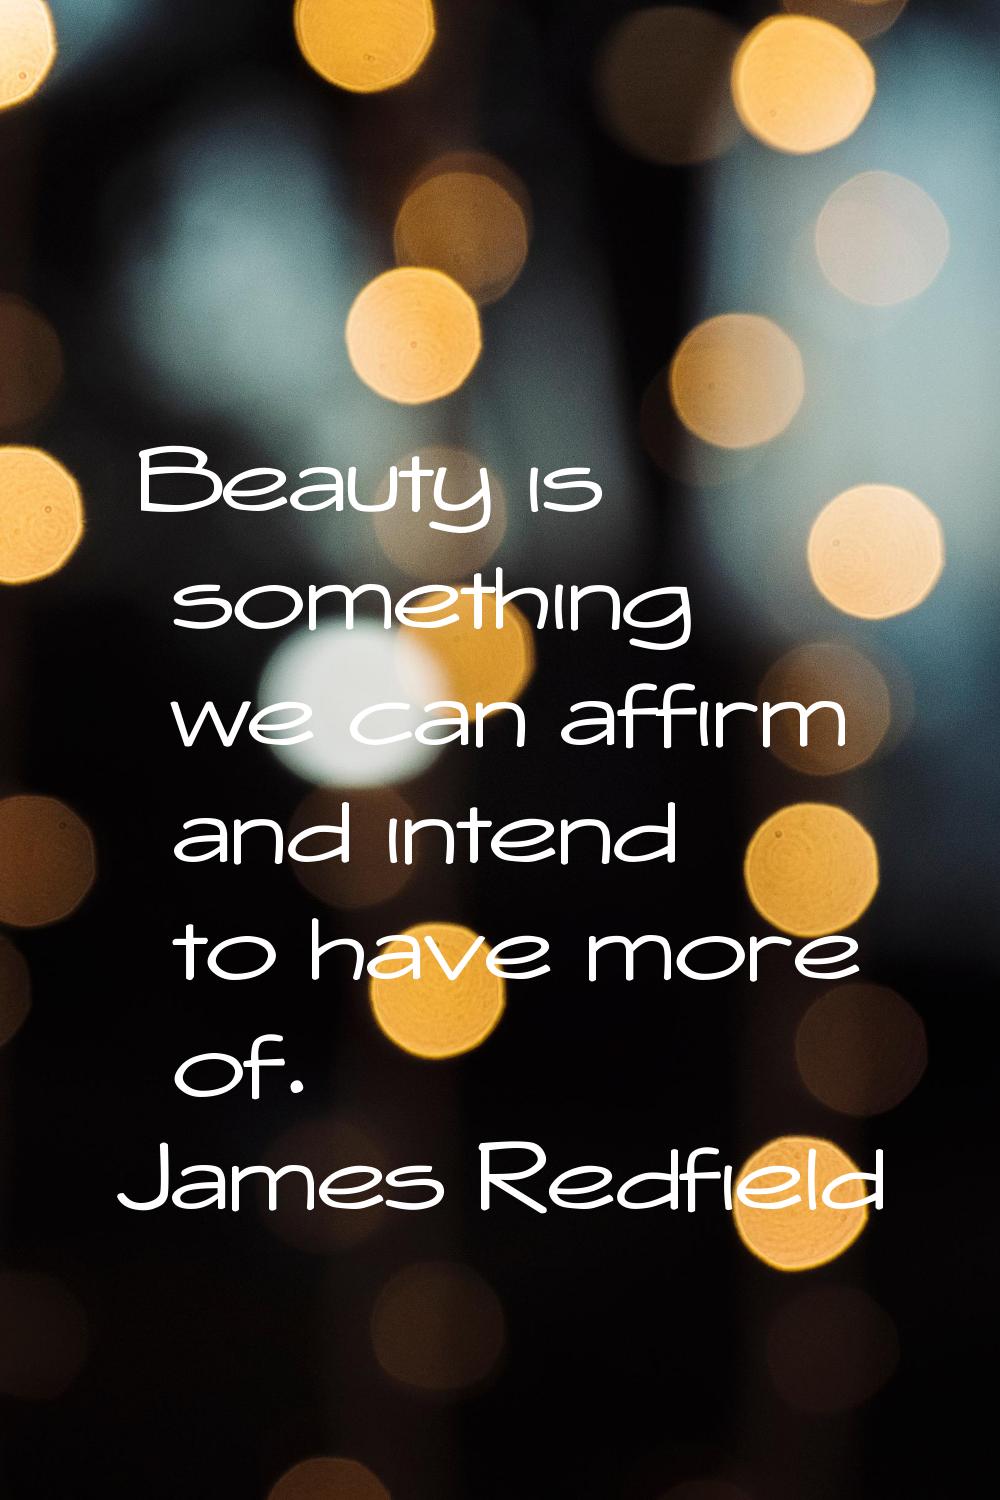 Beauty is something we can affirm and intend to have more of.